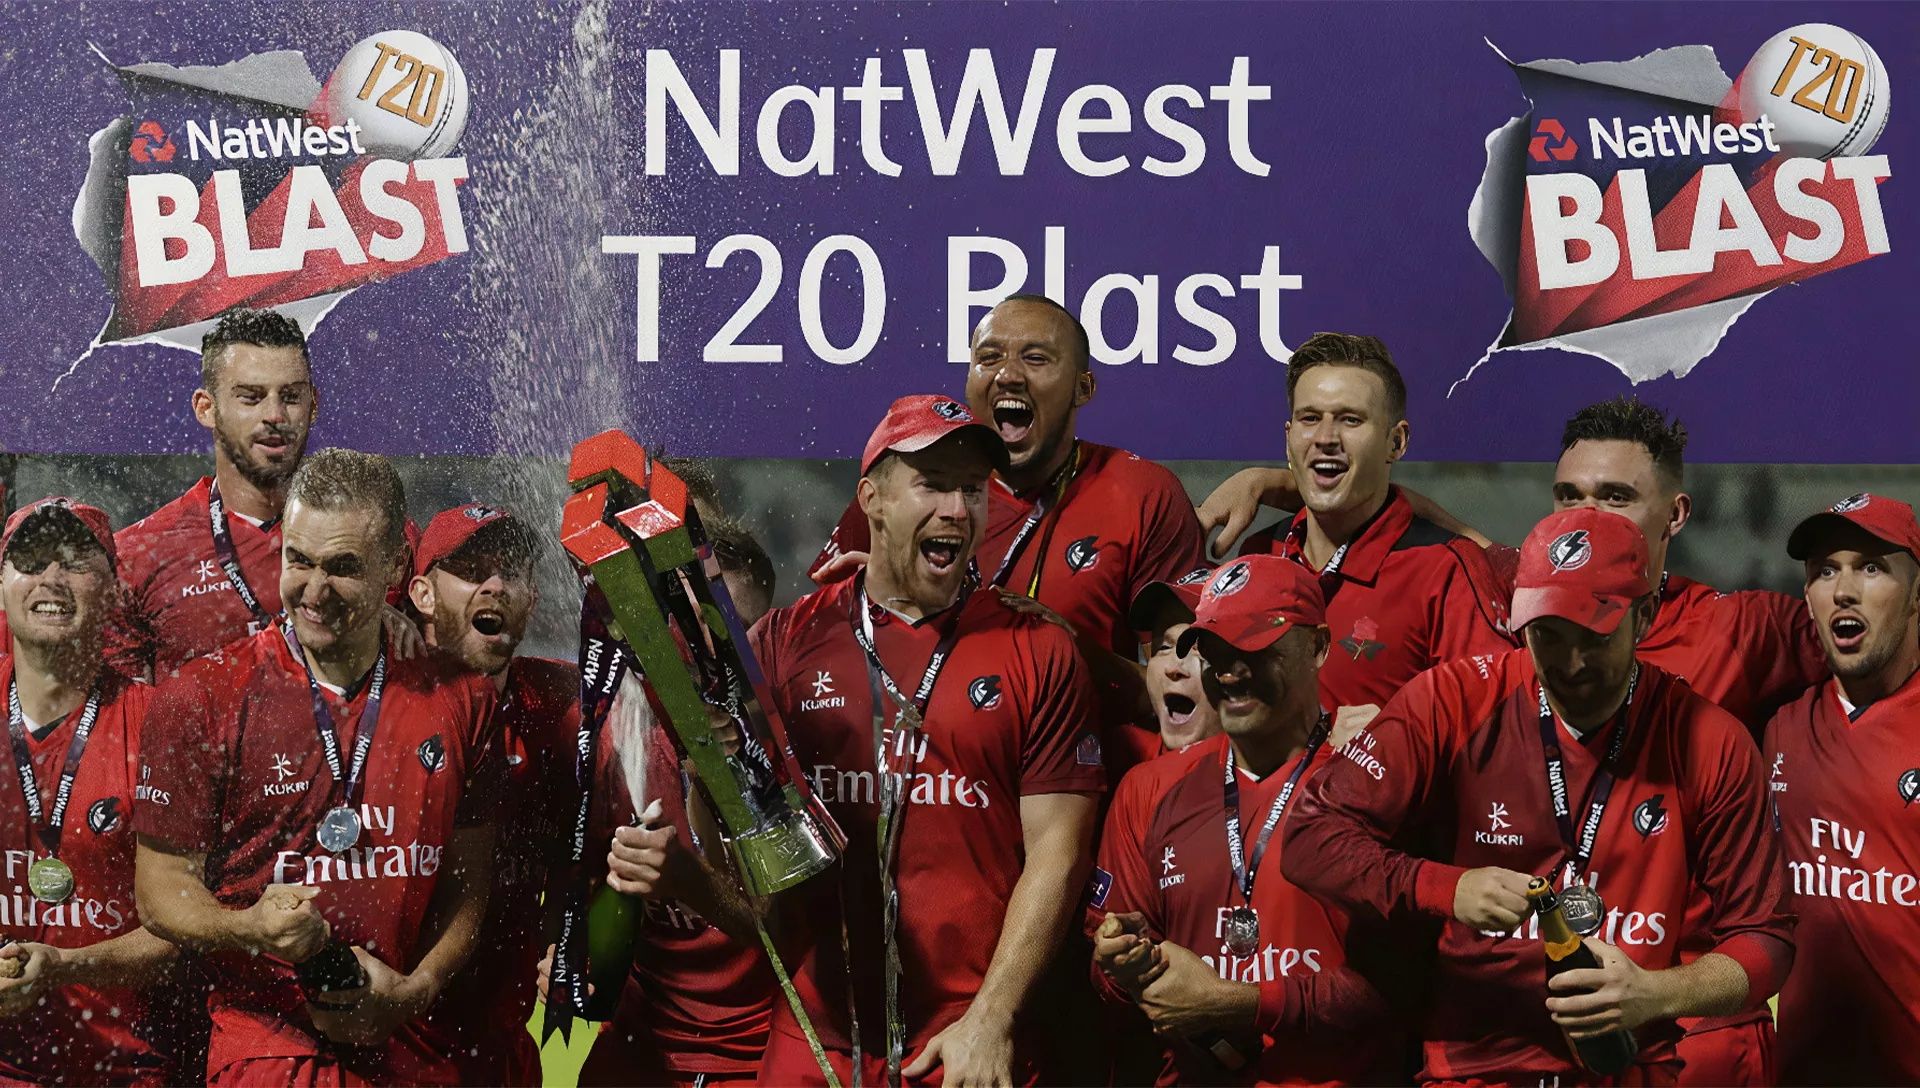 You can place bets on England NatWest T20 Blast League after registering on the site